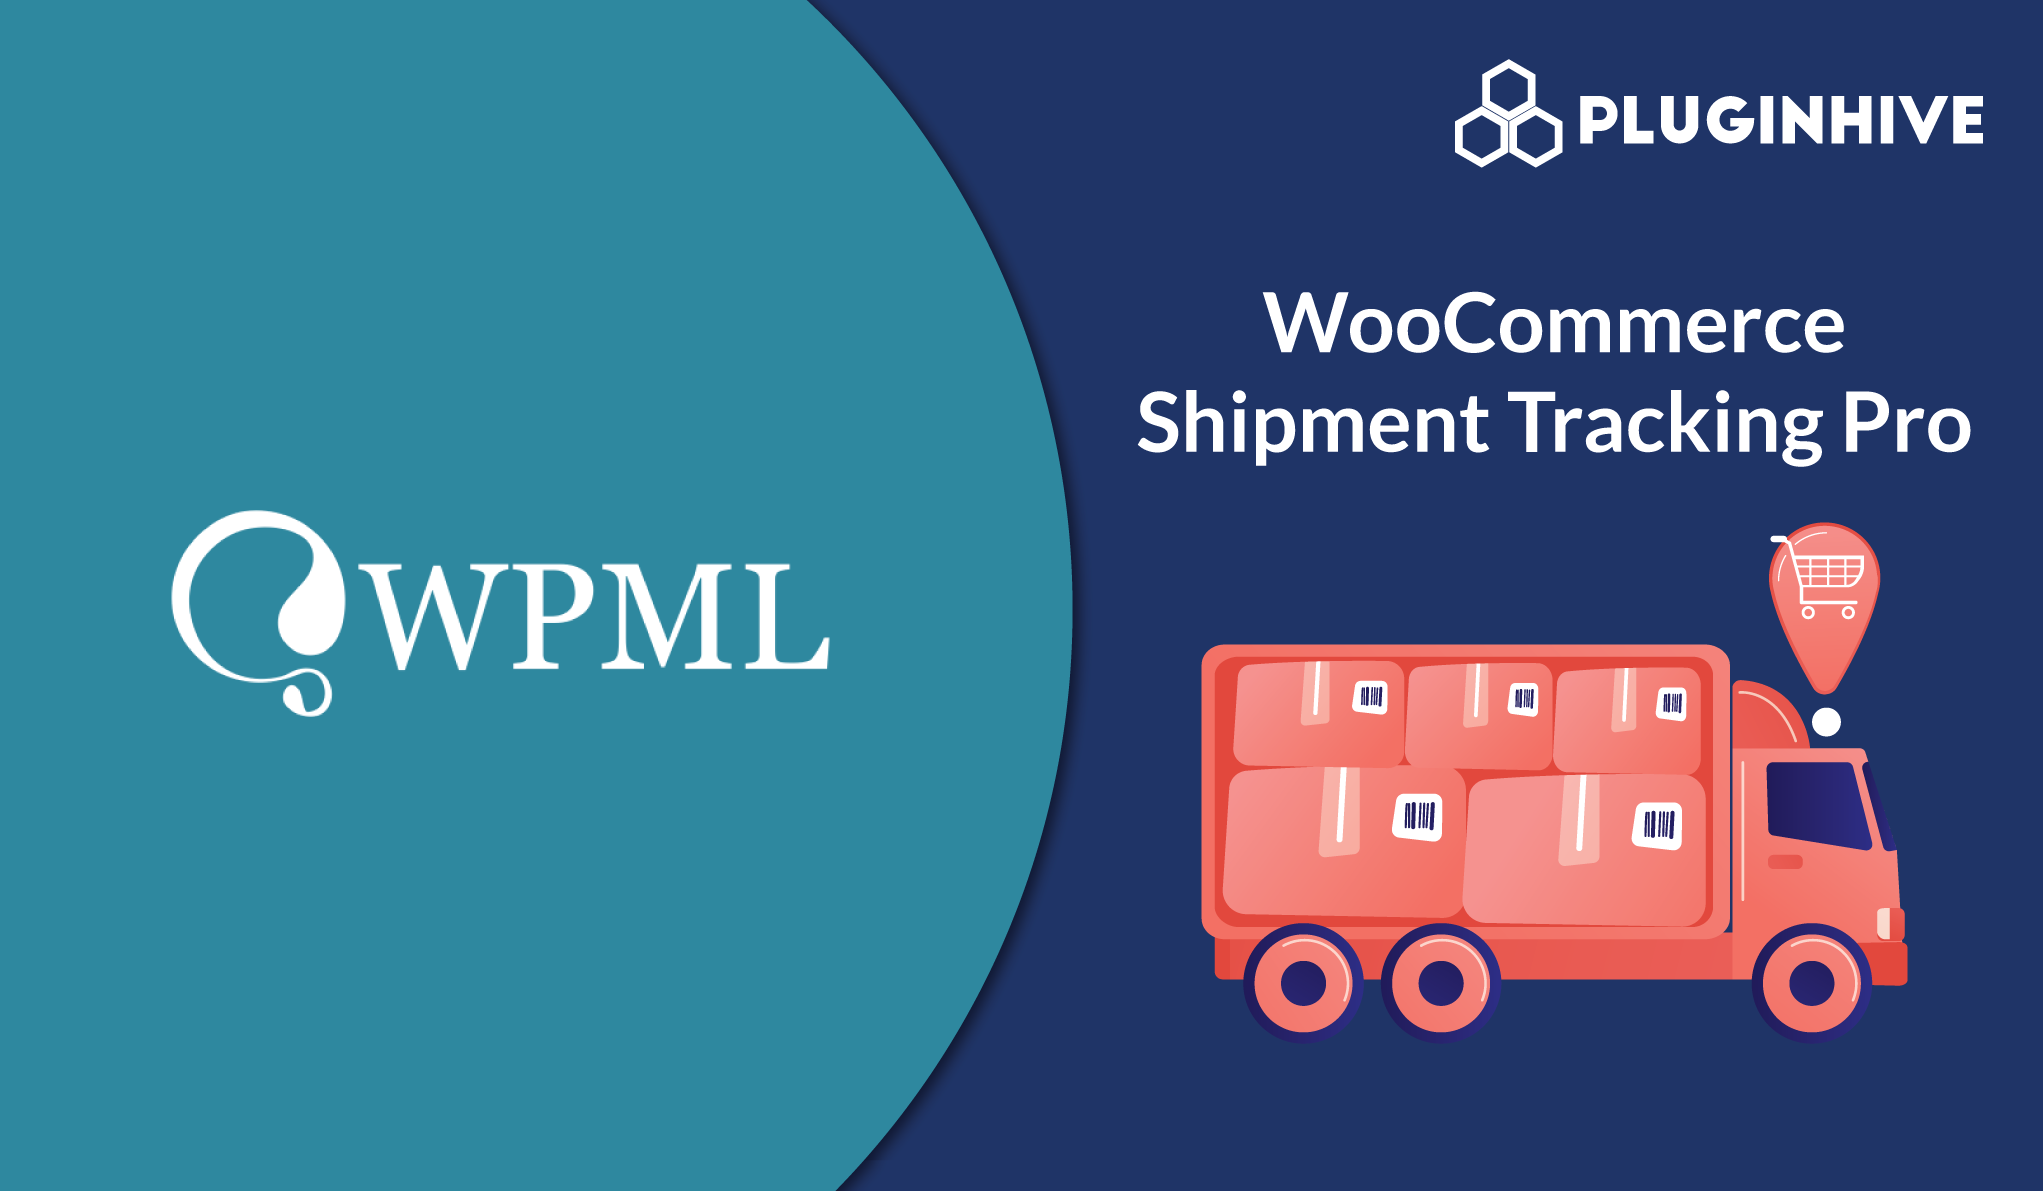 wpml with woocommerce shipment tracking